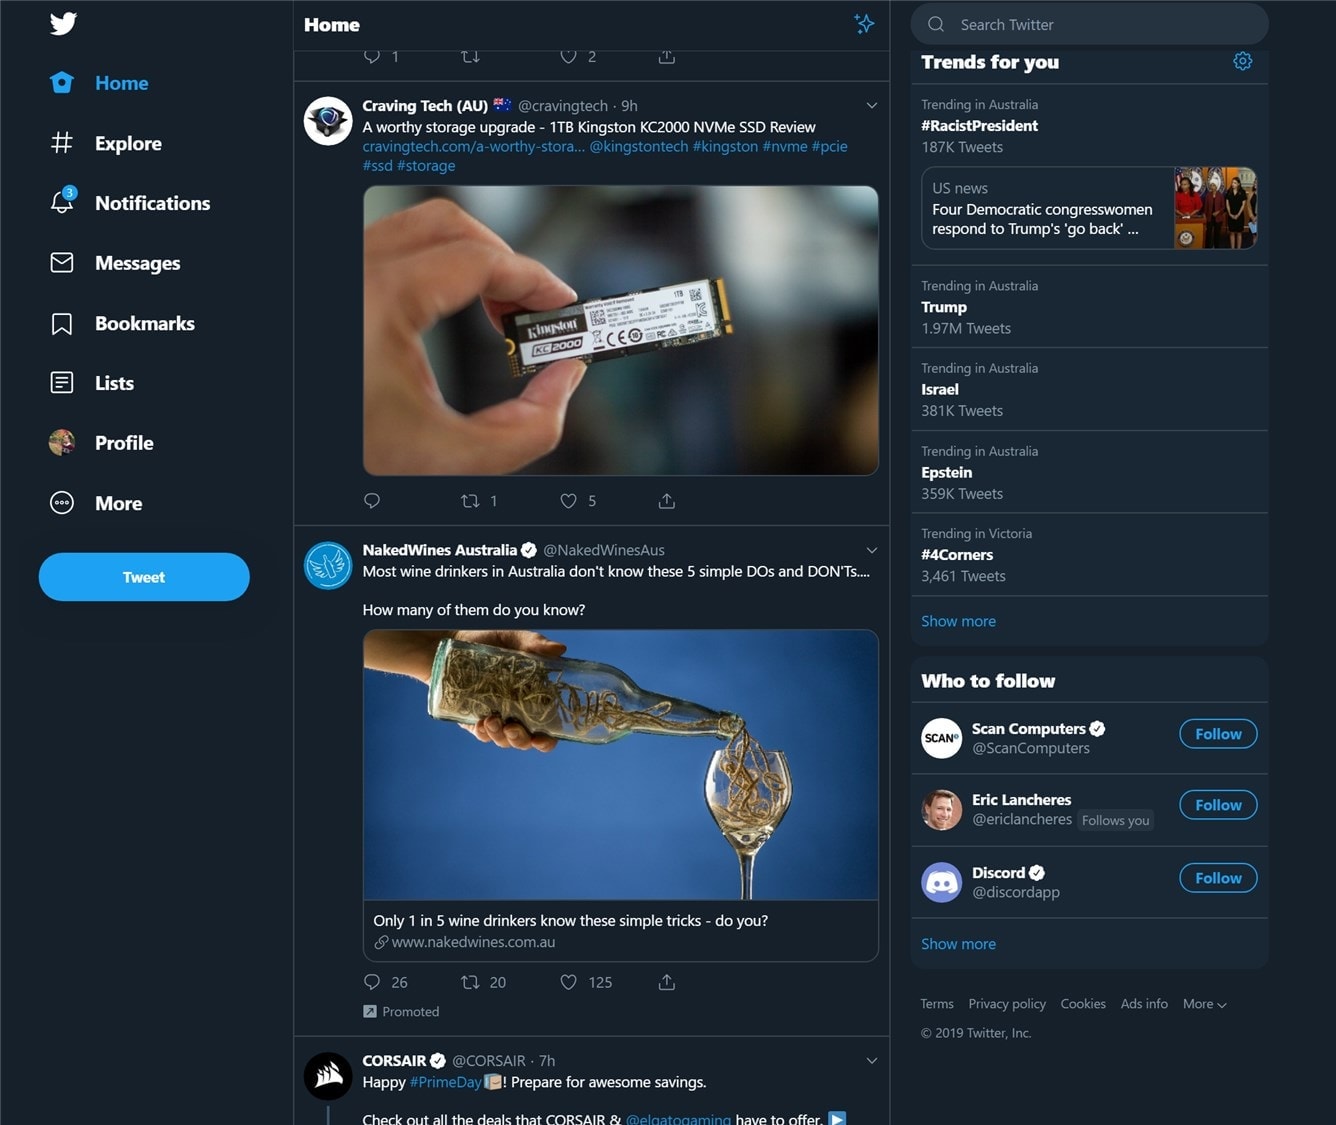 It’s 2019 and Twitter.com has a new look